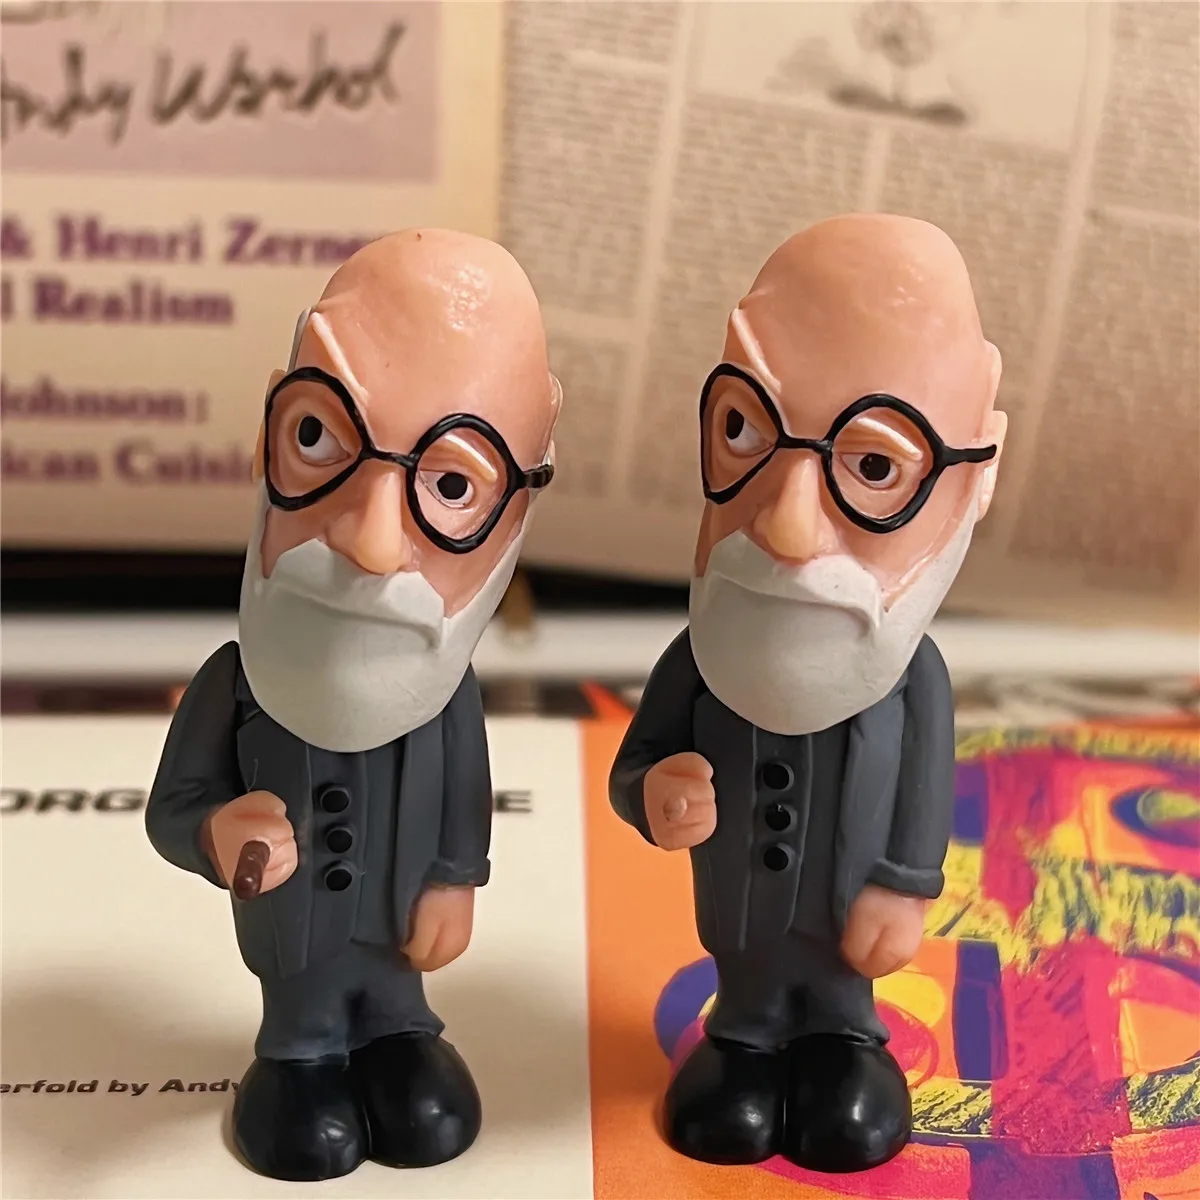 7cm cartoon Sigmund Freud Action figure doll kids PVC collection model doll  _ - AliExpress Mobile